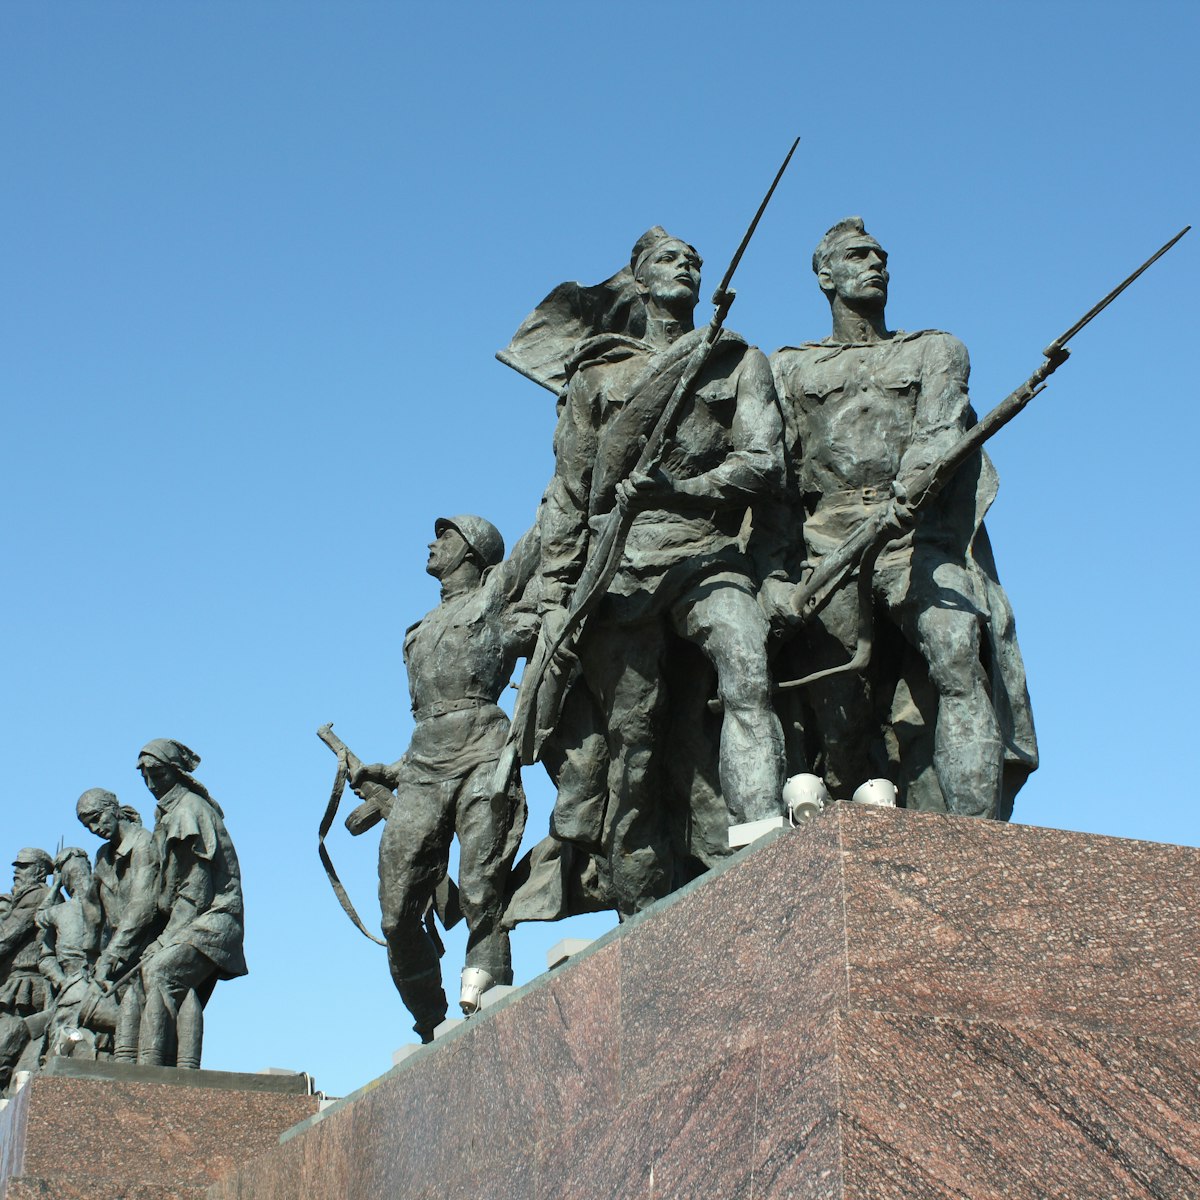 Monument to defenders of Leningrad in Saint Petersburg; Shutterstock ID 43164169; Your name (First / Last): Josh Vogel; Project no. or GL code: 56530; Network activity no. or Cost Centre: Online-Design; Product or Project: 65050/7529/Josh Vogel/LP.com Destination Galleries